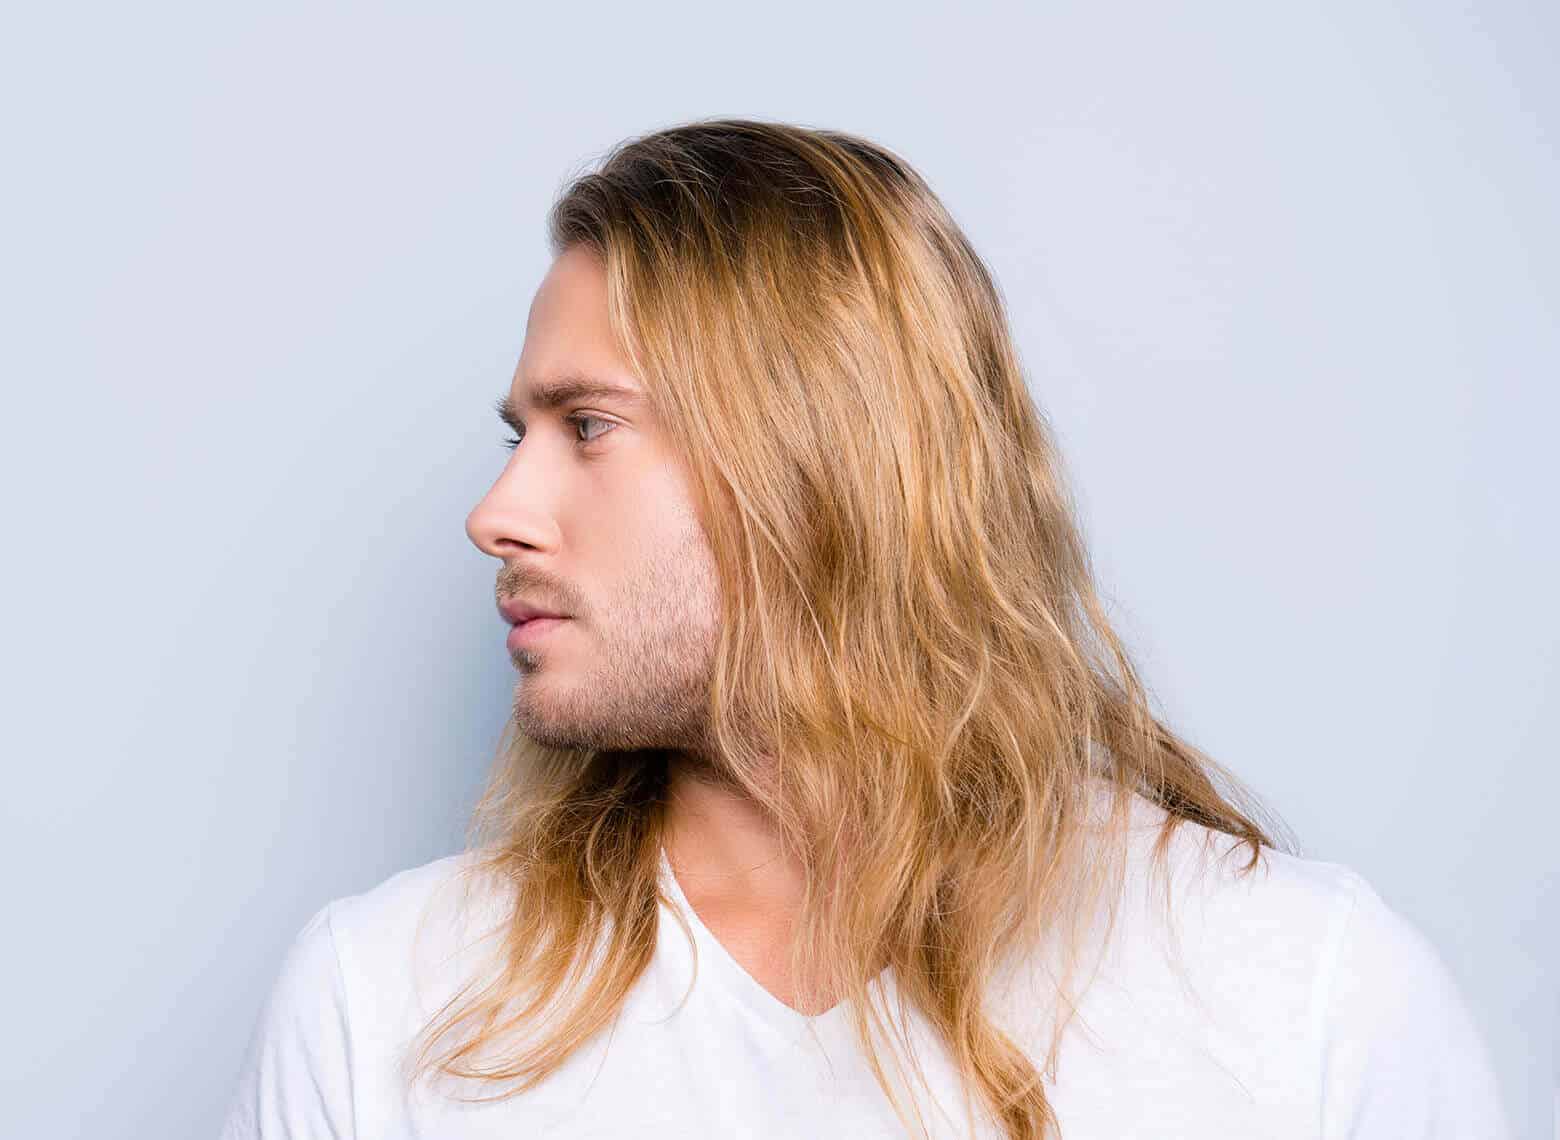 man with long and tousled hair